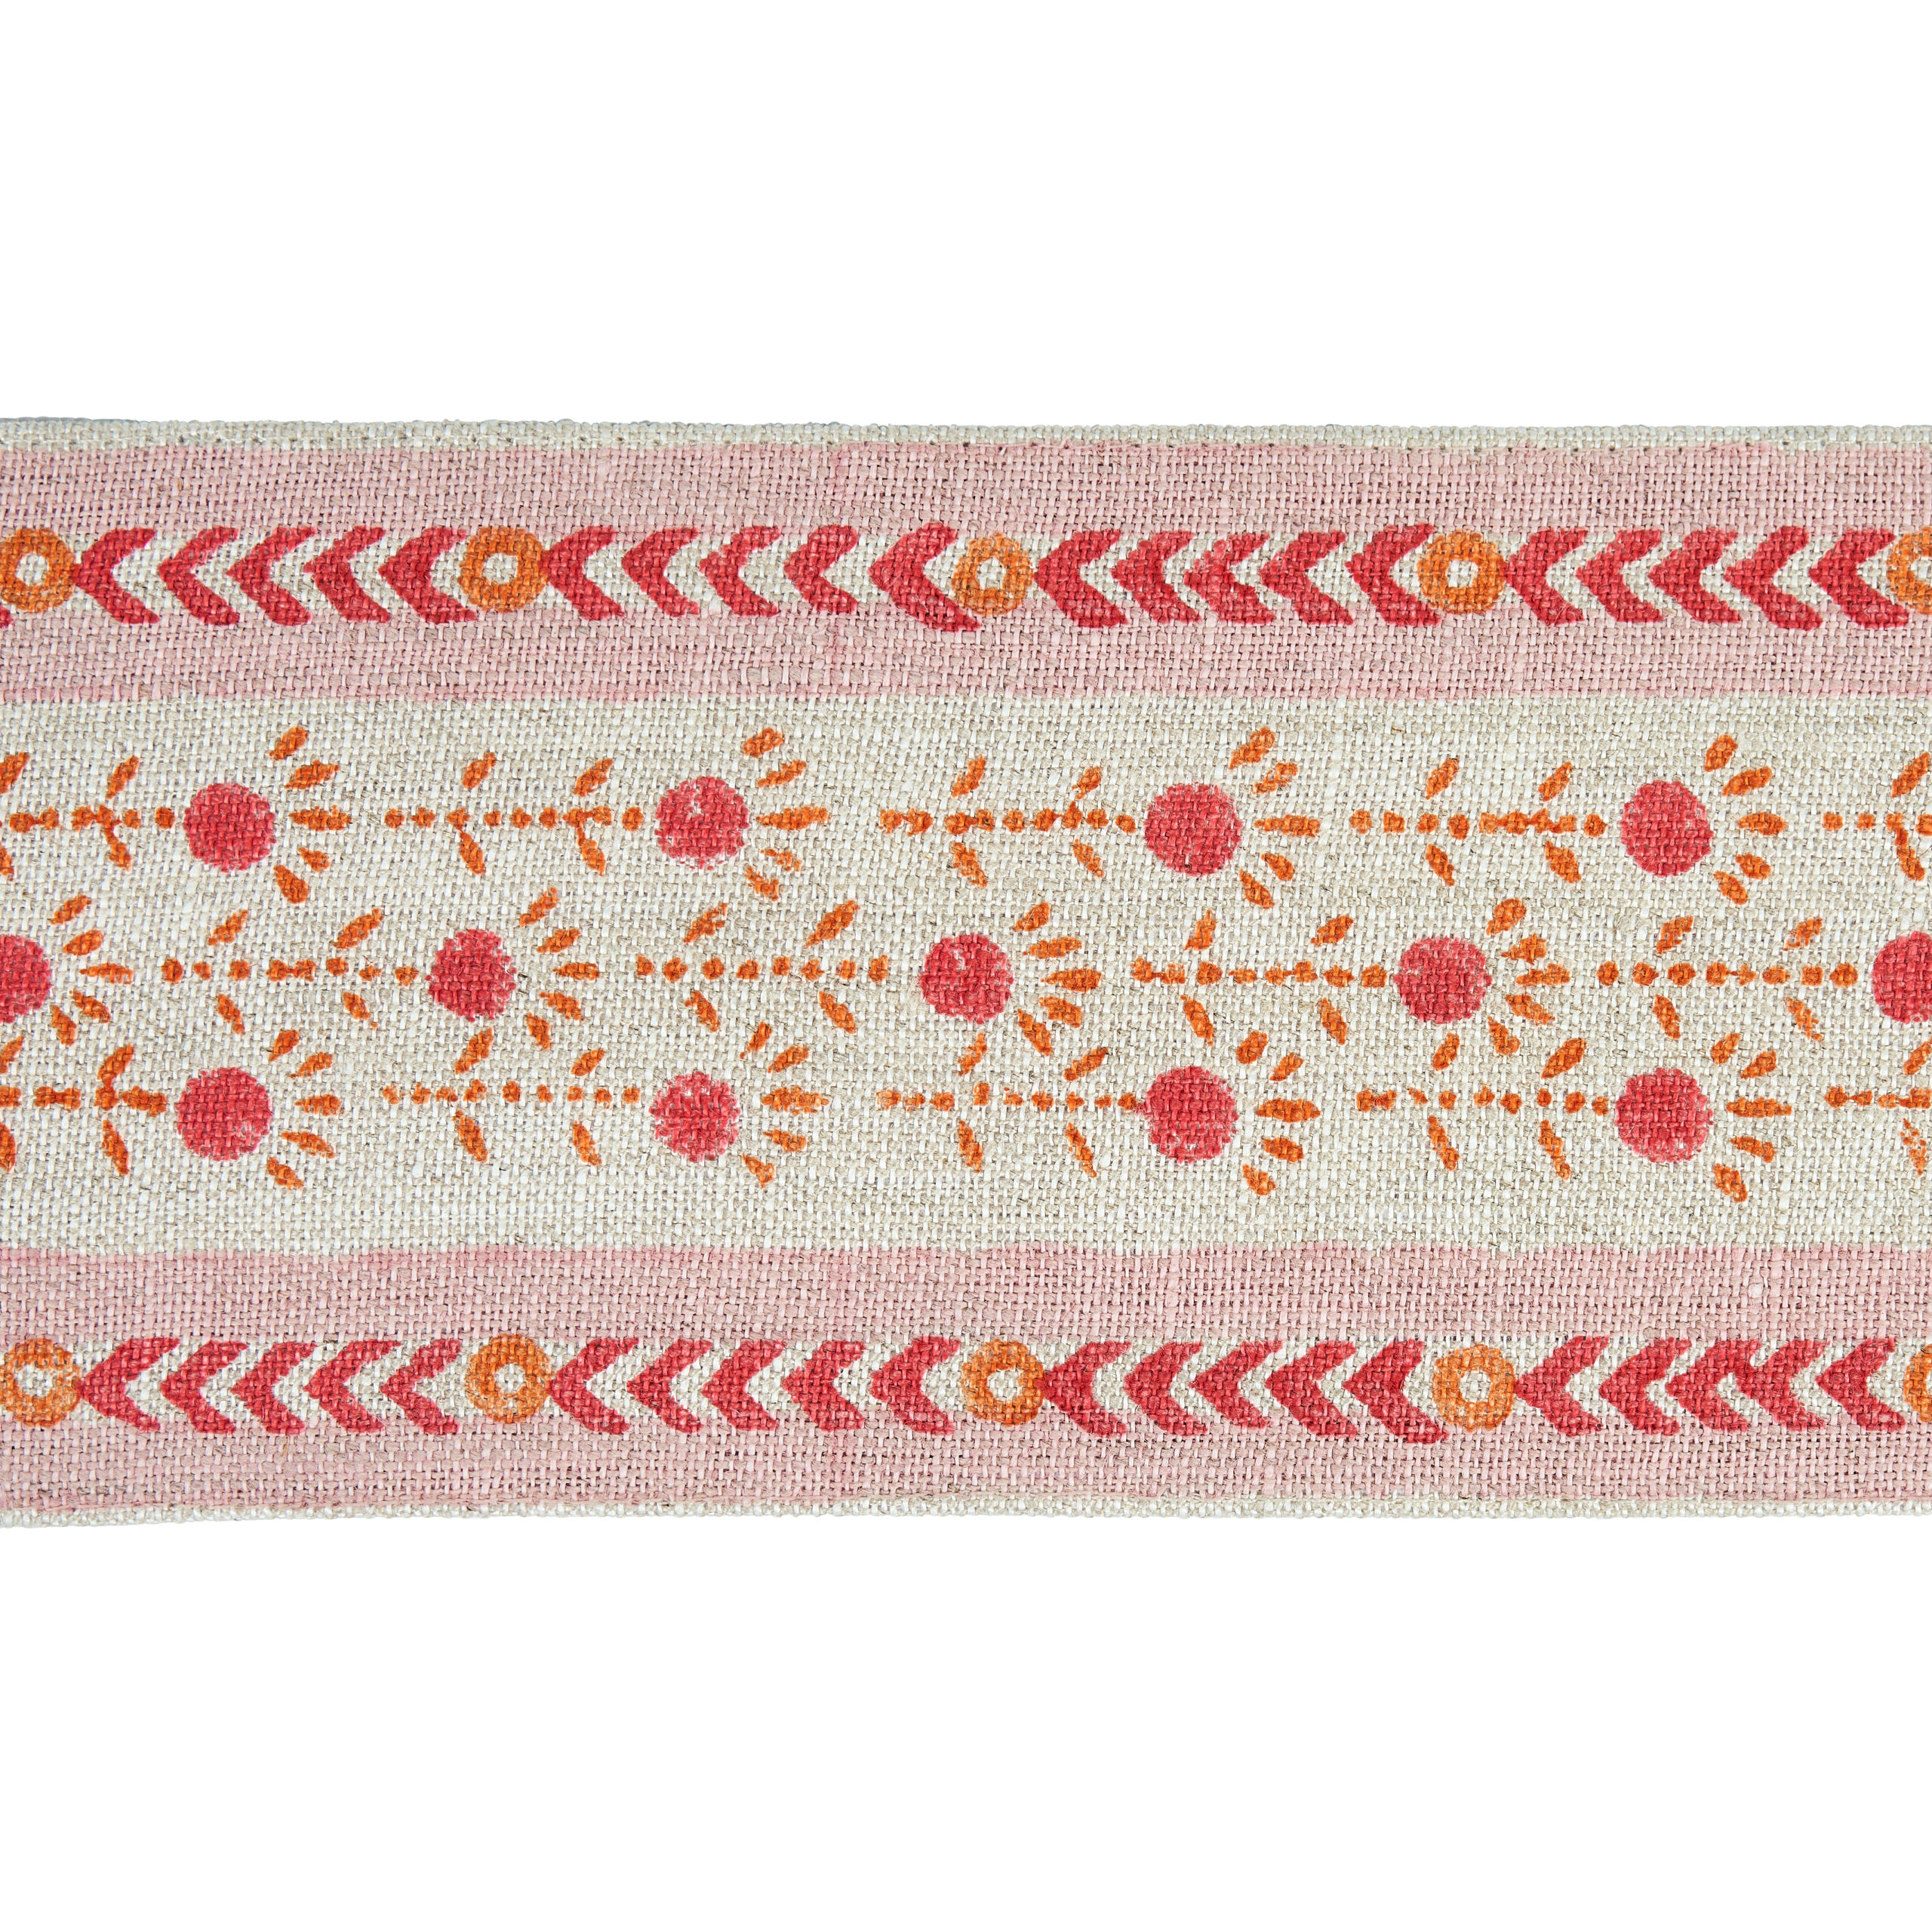 Pica Bella Hand Blocked Tape in Pink and Orange